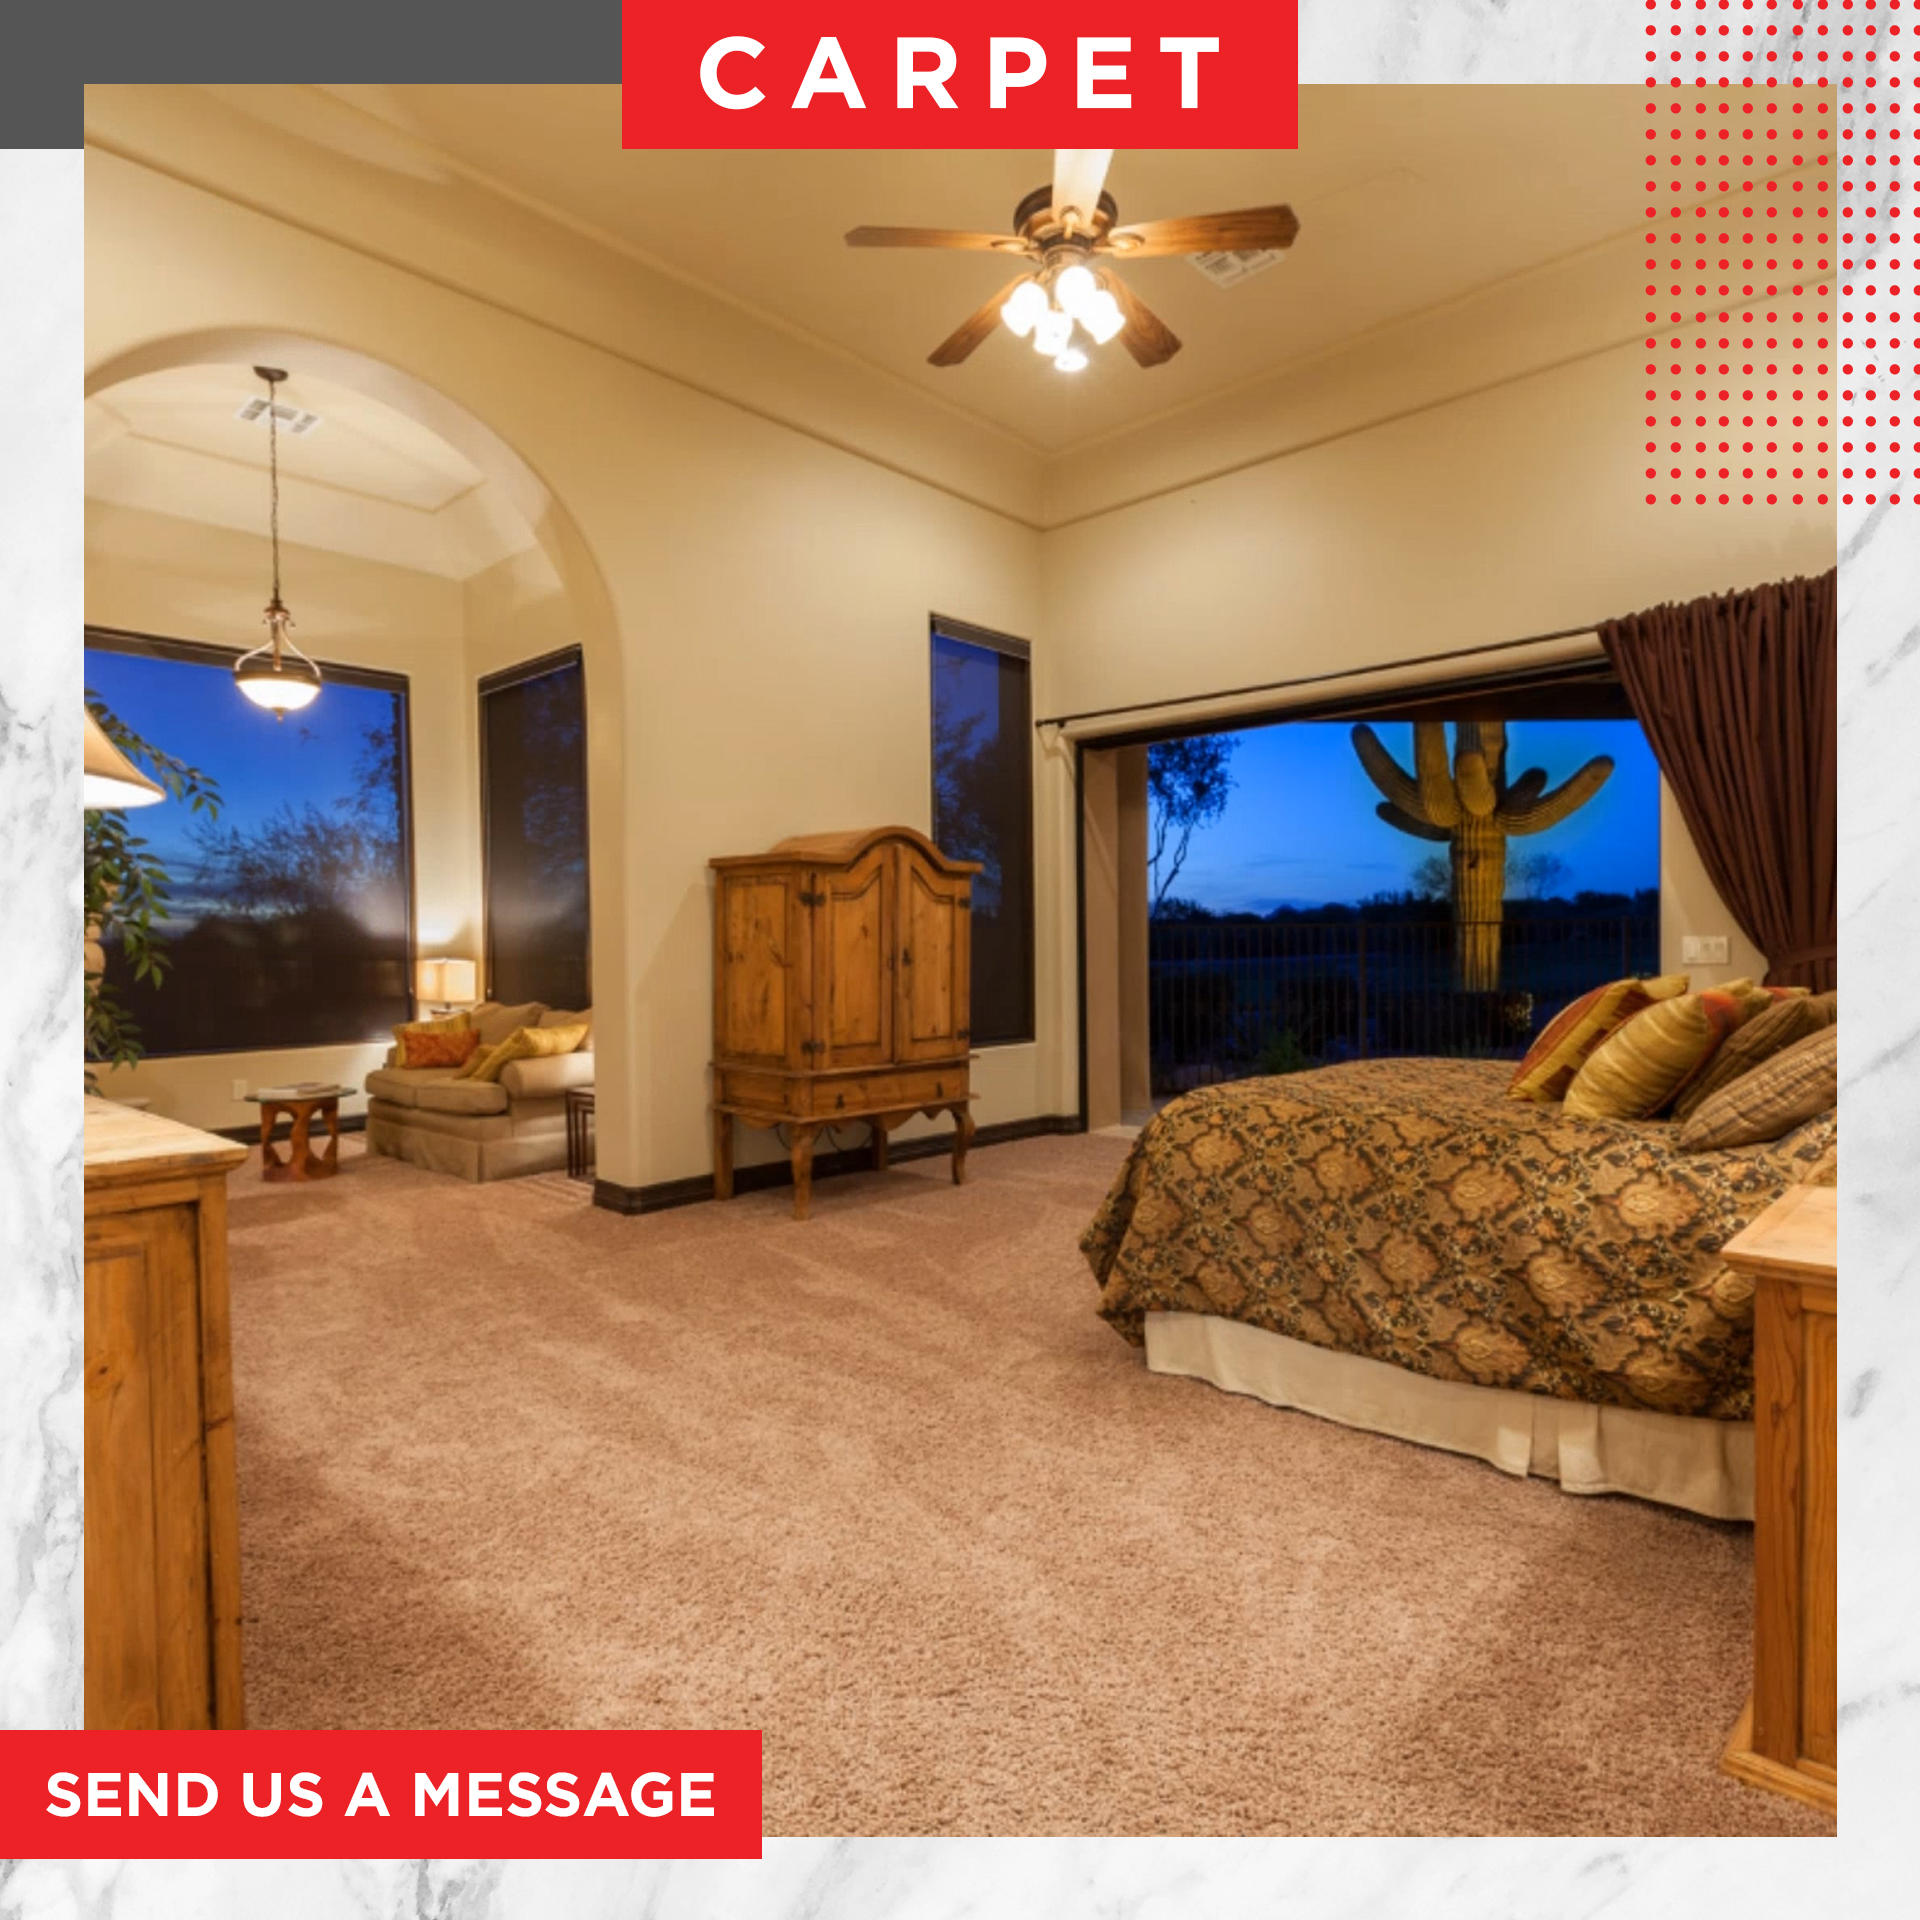 We can't get over with this install!  We tore out the old flooring and replaced it with this carpet product. It looks flawless in this bedroom! Call Home Solutionz Today For Your Flooring Project <(480) 463-4517>. Home Solutionz - Phoenix is Licensed, Bonded, and Insured. Home Solutionz offers 12 - 24 Months 0% Financing Through Wells Fargo. Home Solutionz Phoenix - 4645 S 36th St Phoenix, AZ 85040 United States  Carpet  FloorInstallation  Flooring (Disclaimer: flooring on photos aren't actual products of Home Solutionz but these are what we can offer)